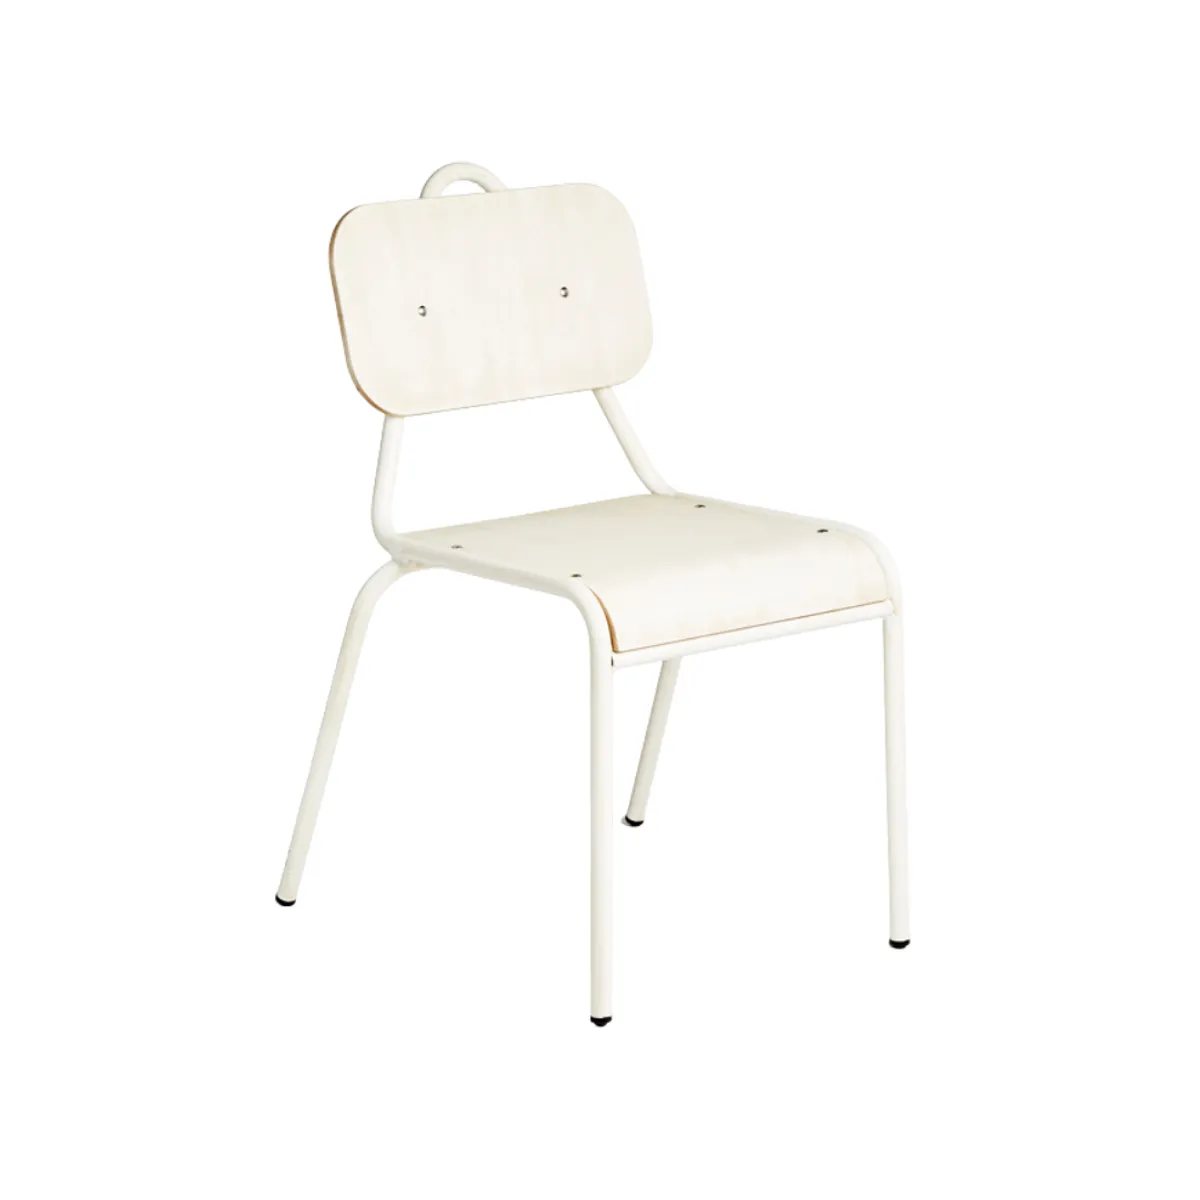 Elementary stacking chair +